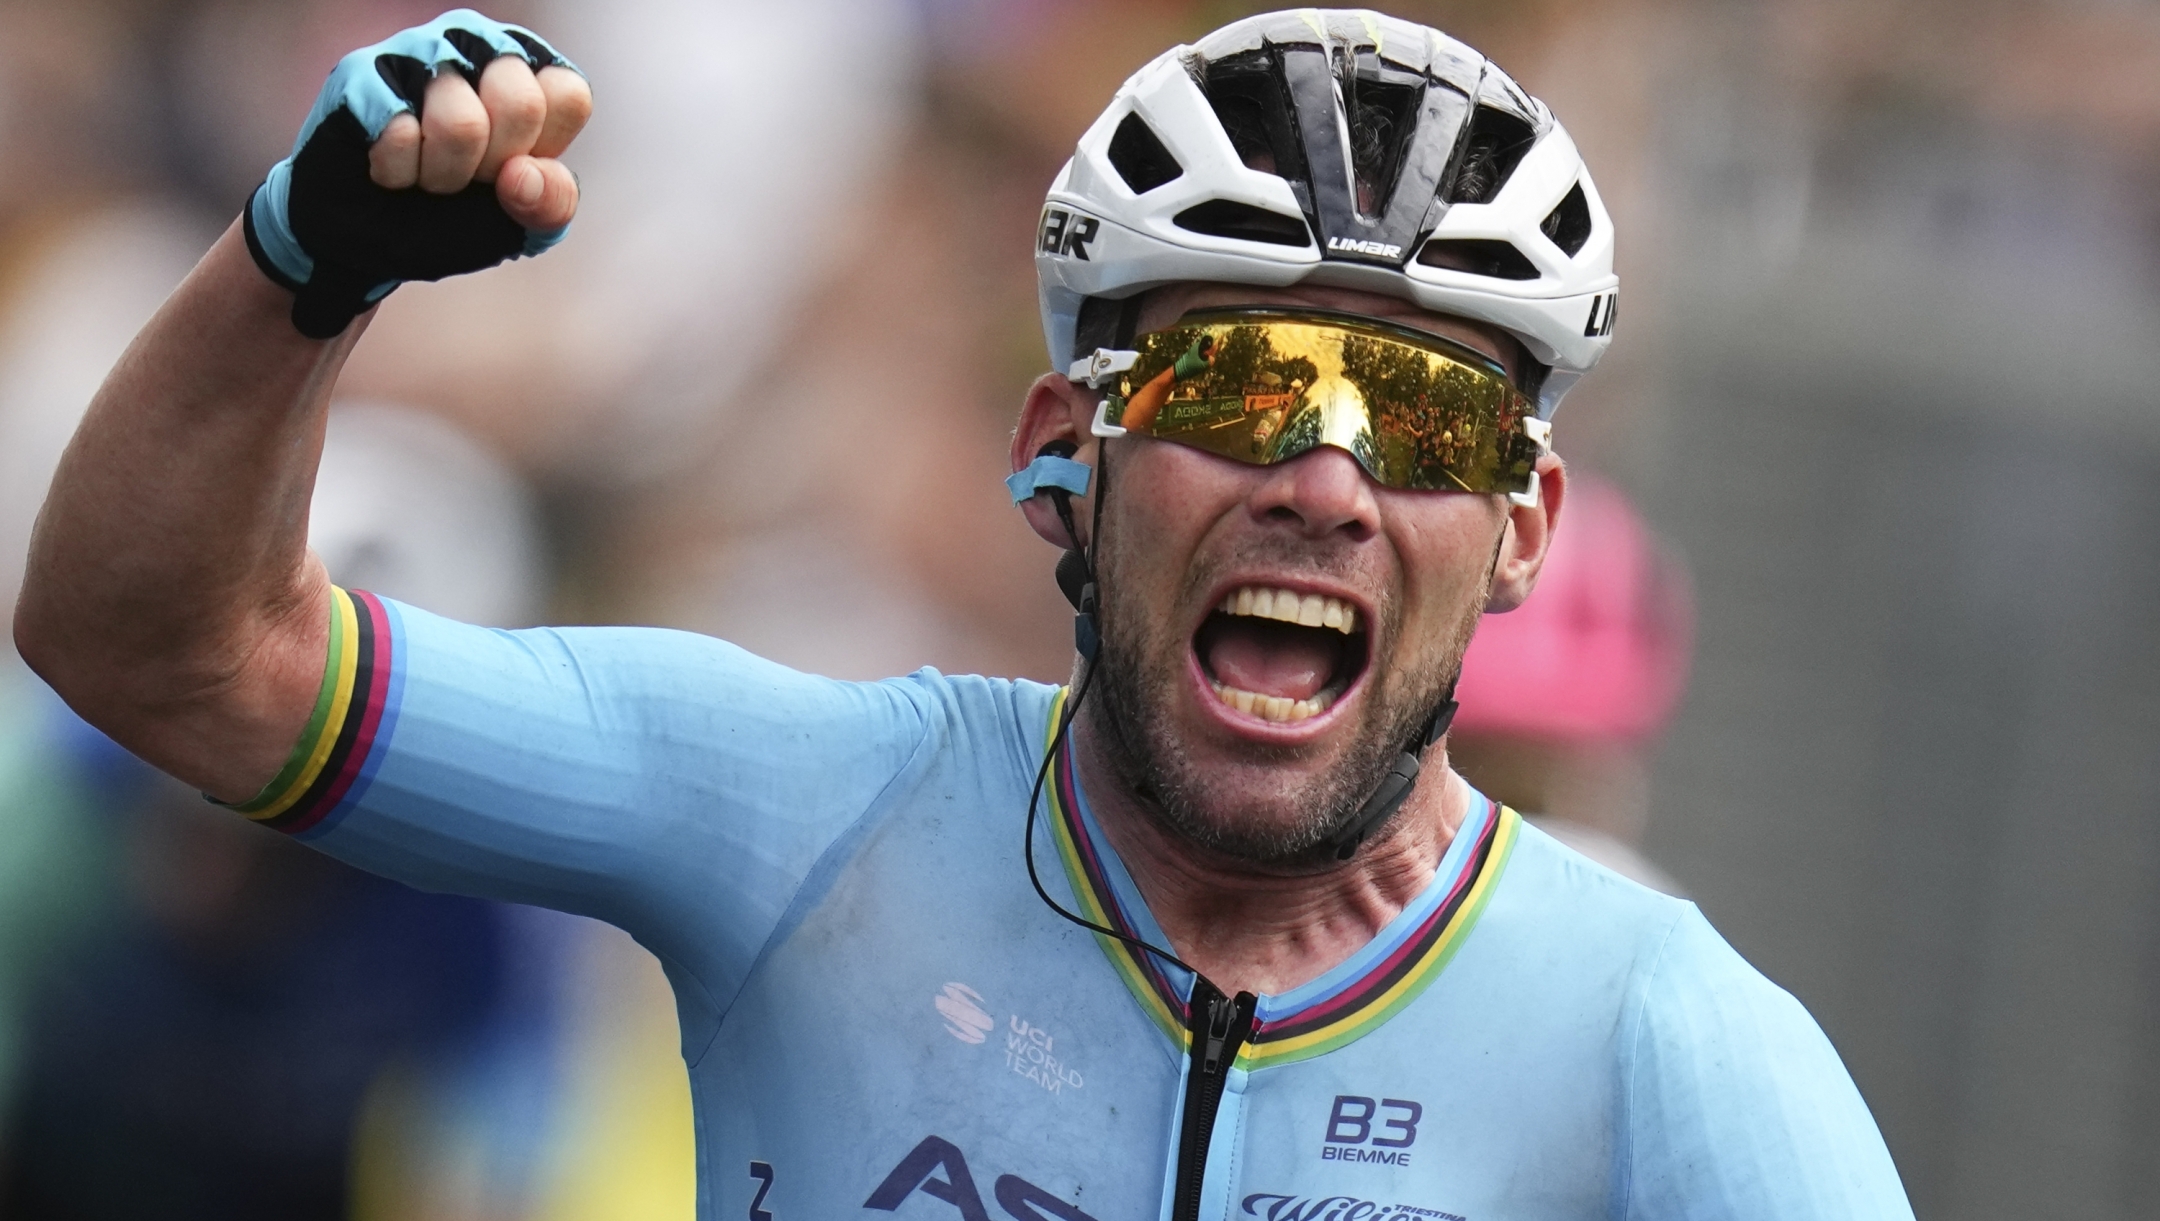 Britain's sprinter Mark Cavendish crosses the finish line to win a record 35th Tour de France stage and break the record of Belgian legend Eddy Merckx in the fifth stage of the Tour de France cycling race over 177.4 kilometers (110.2 miles) with start in Saint-Jean-de-Maurienne and finish in Saint-Vulbas, France, Wednesday, July 3, 2024. (AP Photo/Daniel Cole)